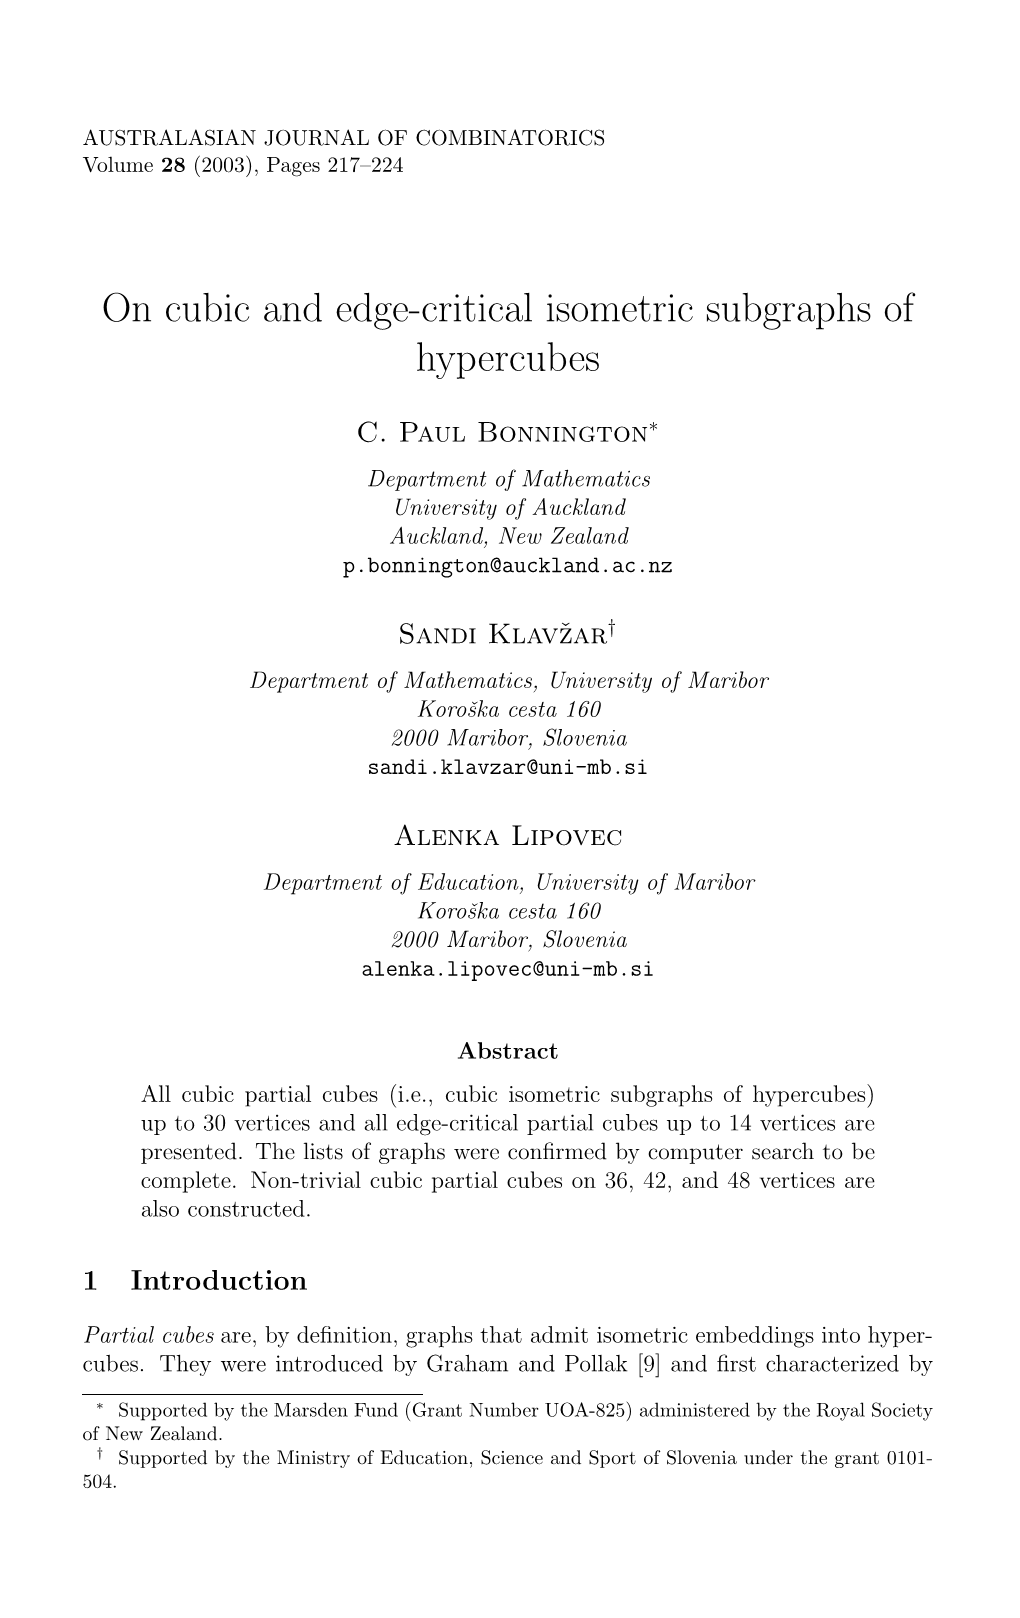 On Cubic and Edge-Critical Isometric Subgraphs of Hypercubes